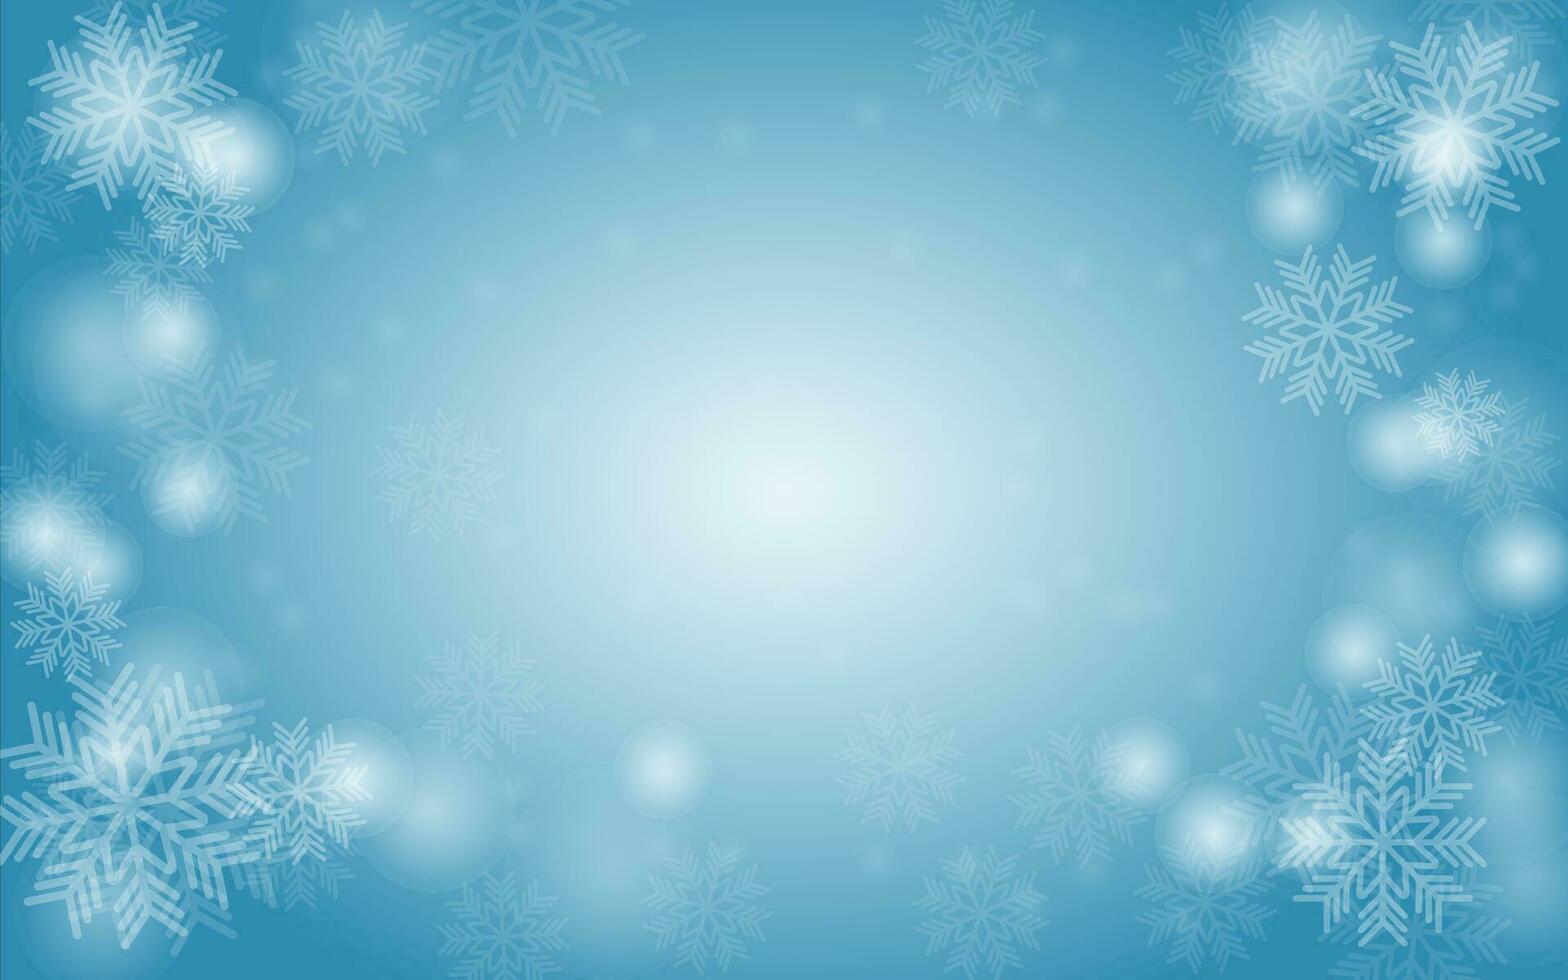 The exquisite snowflake background illustration offers a serene winter ambience. Delicately crafted patterns and icy hues evoke the magic of snowfall, ideal for seasonal designs, and greeting cards. vector